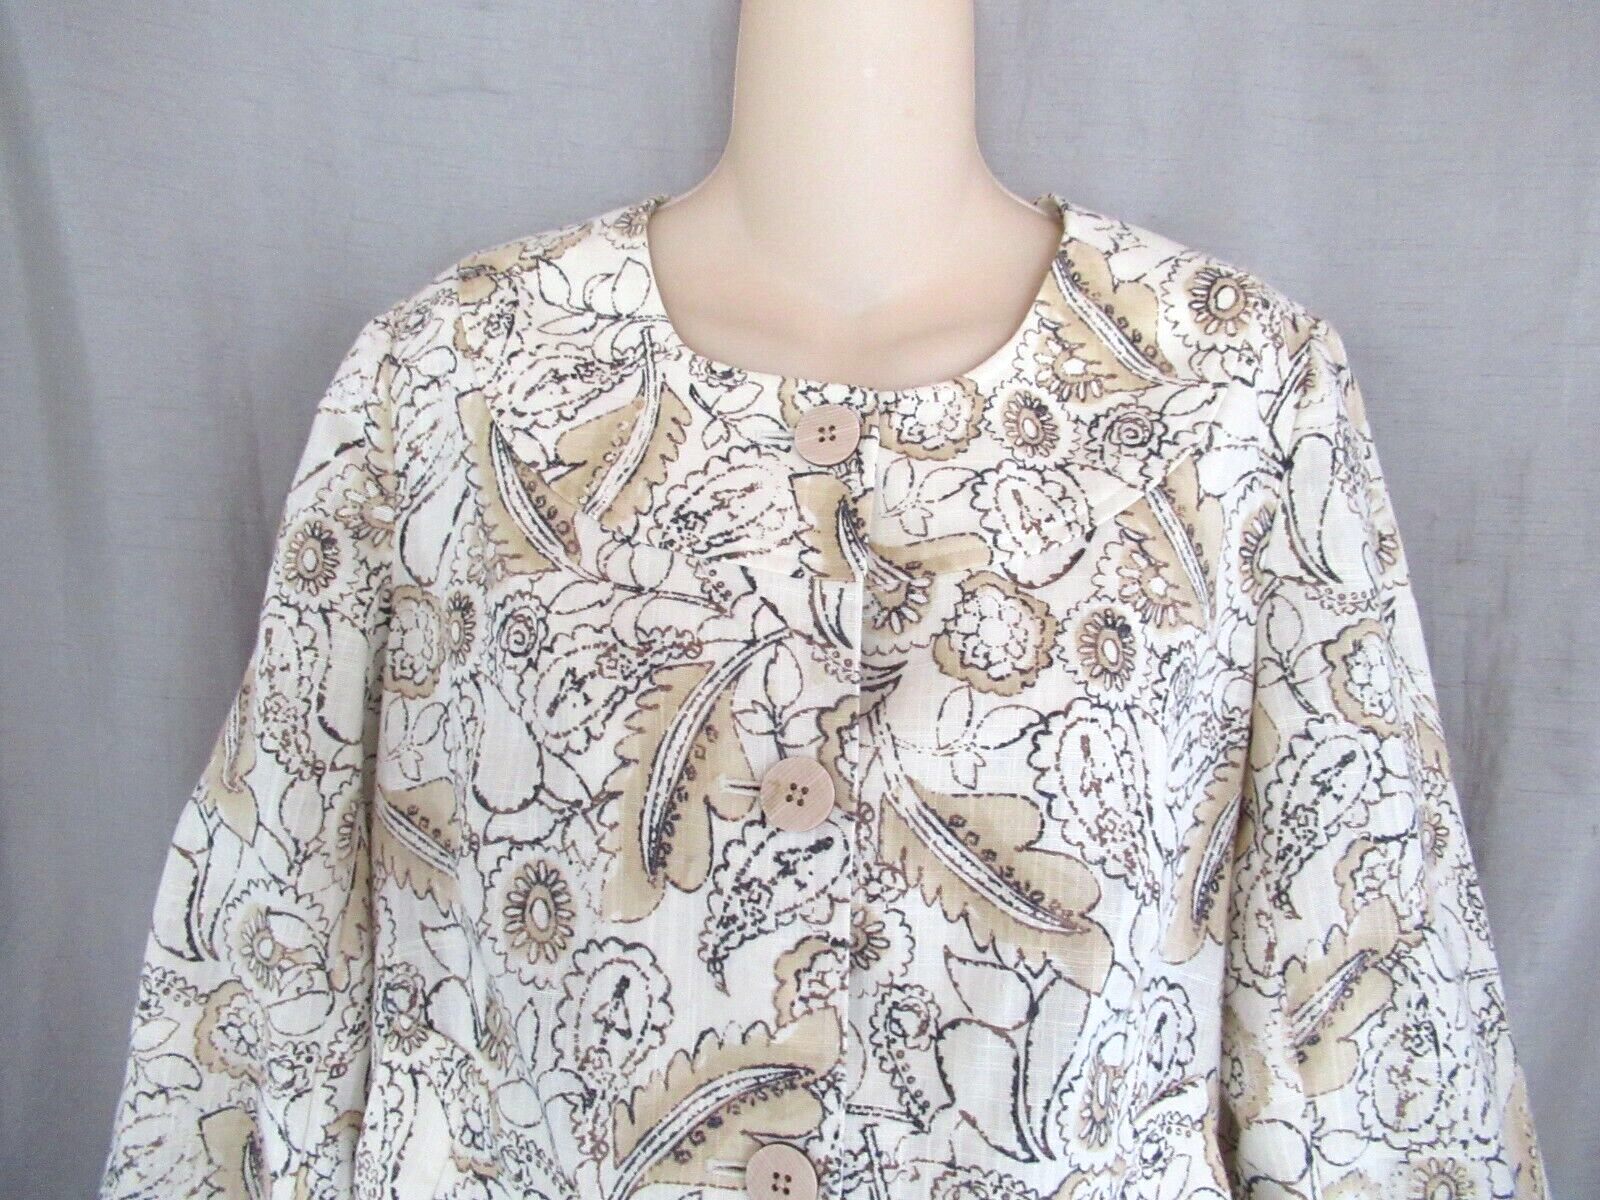 Primary image for J. Jill jacket top linen blend  button up XS  beige floral  3/4 sleeves unlined